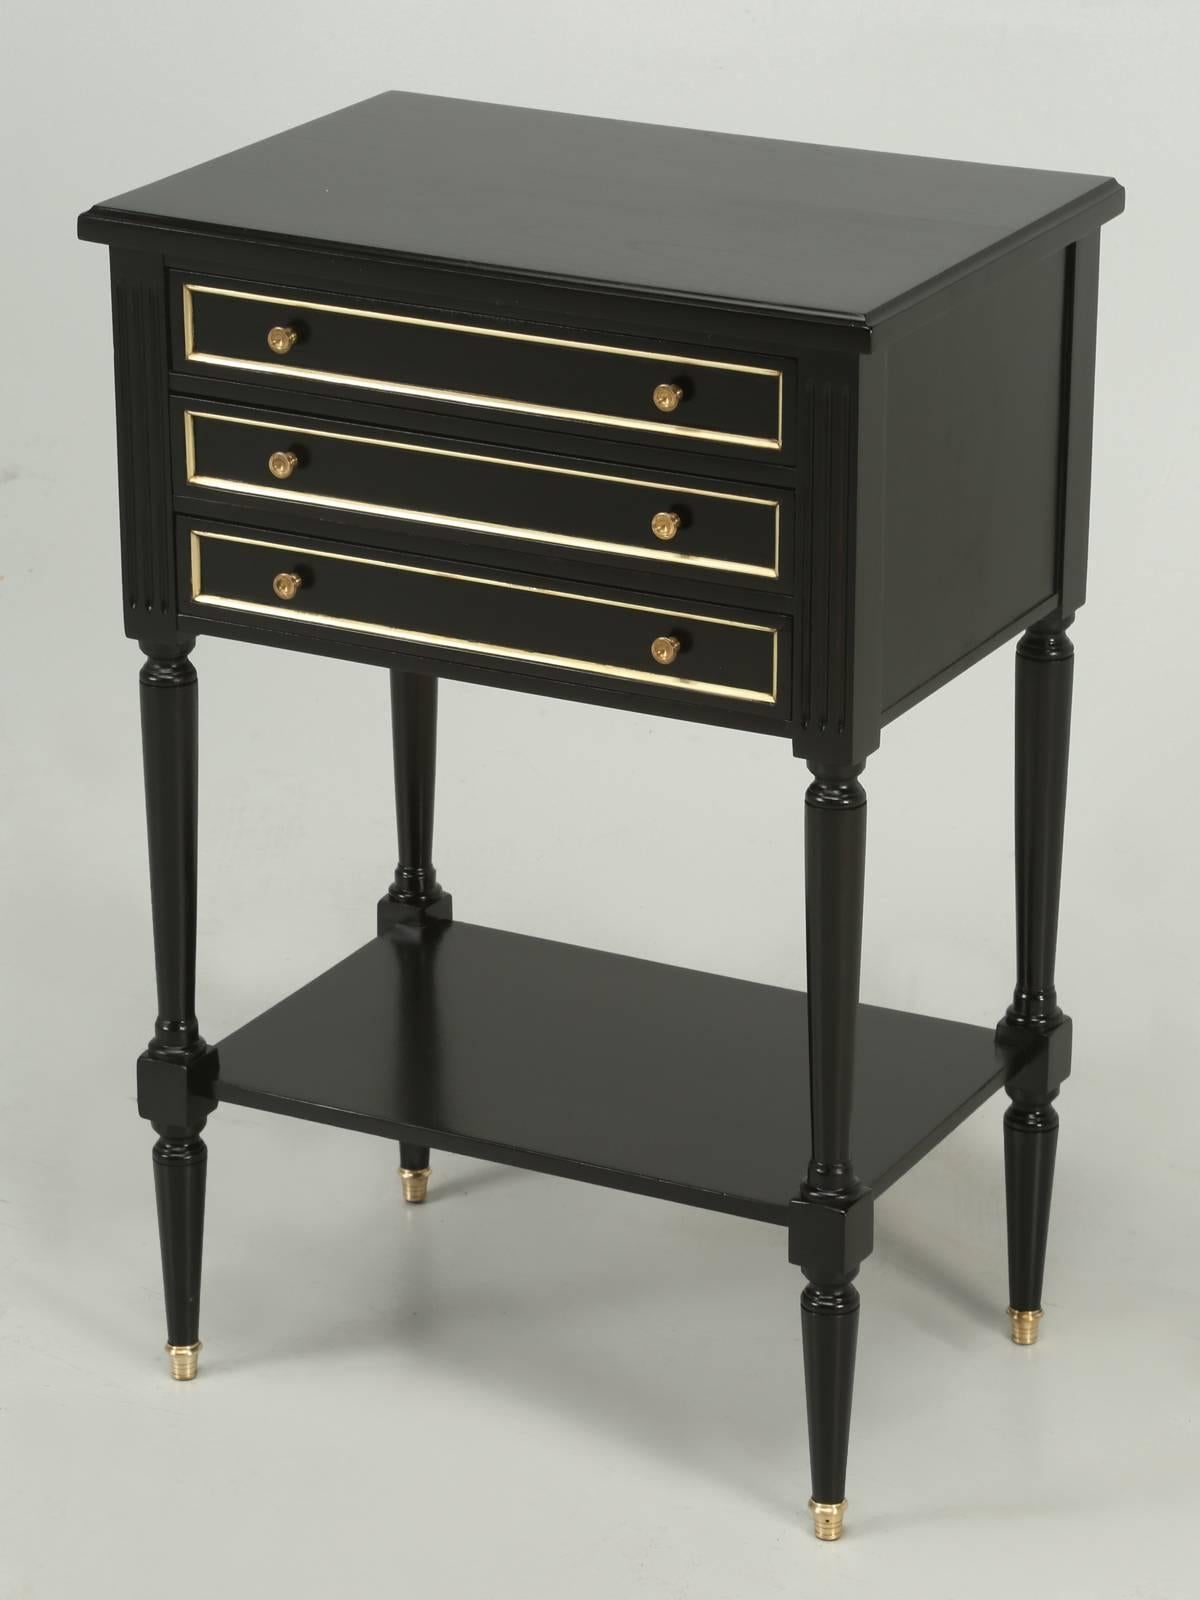 Beautifully restored in an old world ebonized black Louis XVI style nightstand, or side table with brass trim. The grain of the mahogany still shows through the finish and the drawers function as new. This was probably made post the big war and our